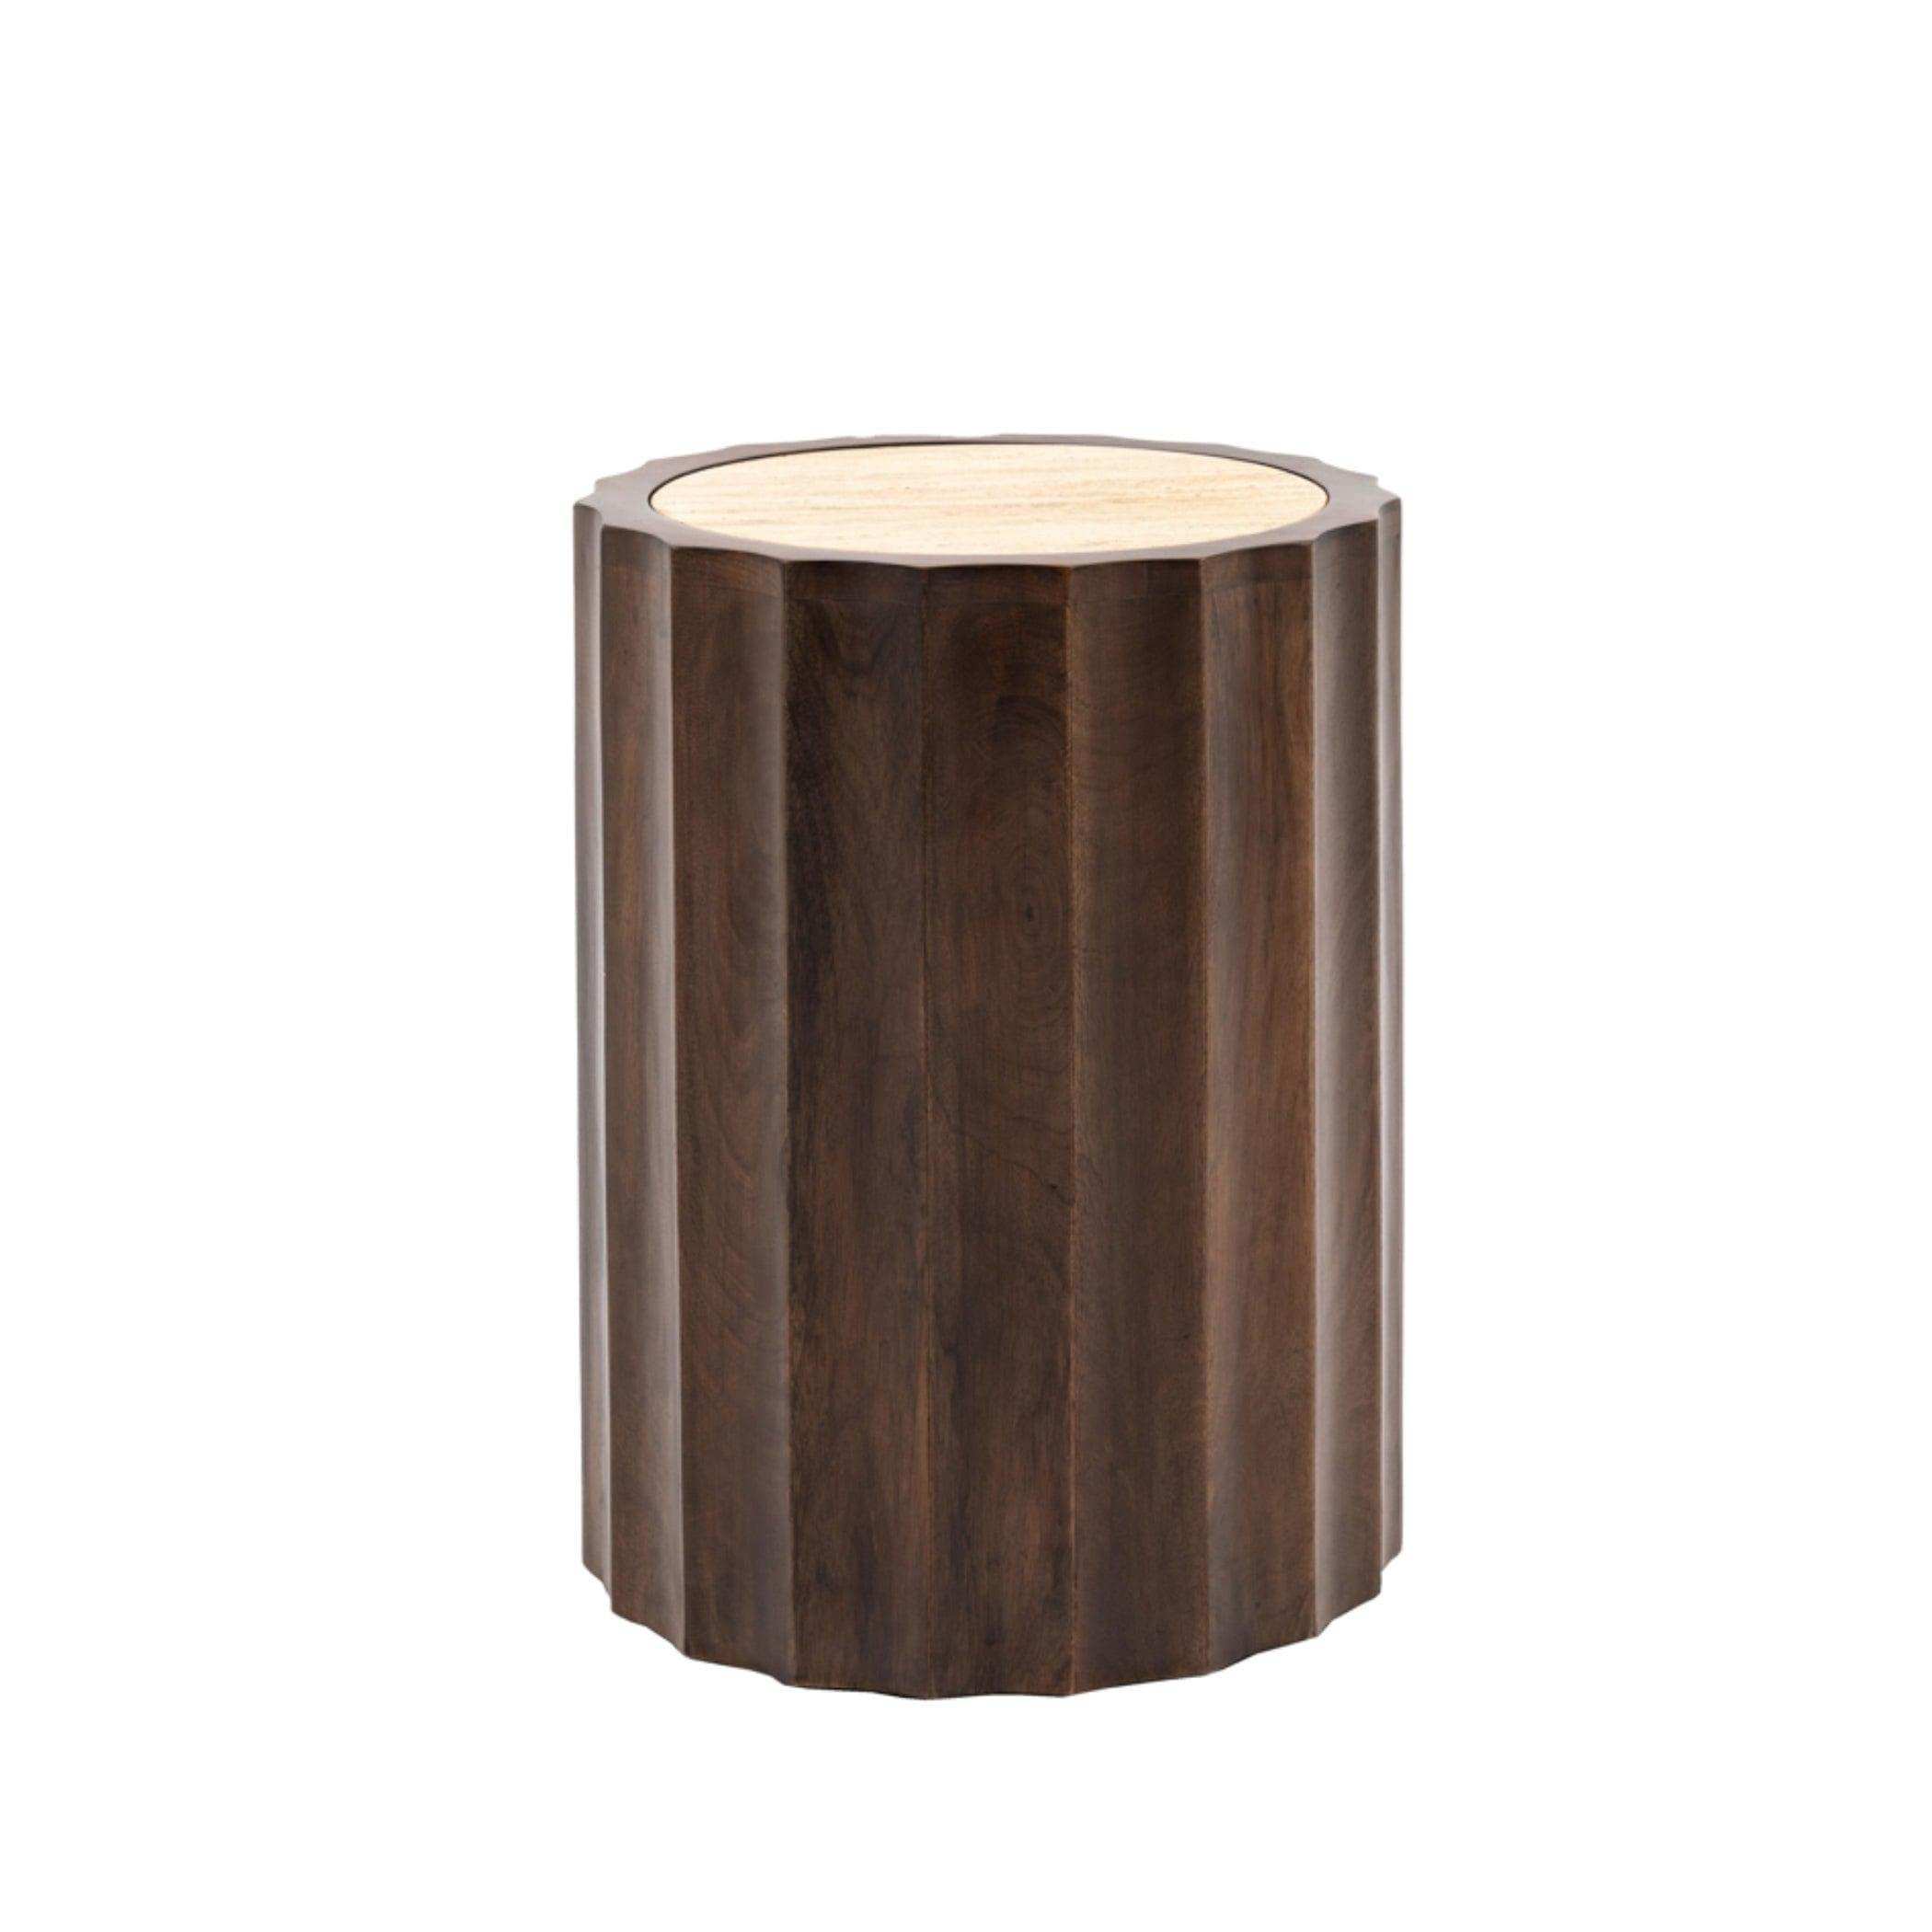 Scalloped Edge Wooden Drum Side Table - The Farthing